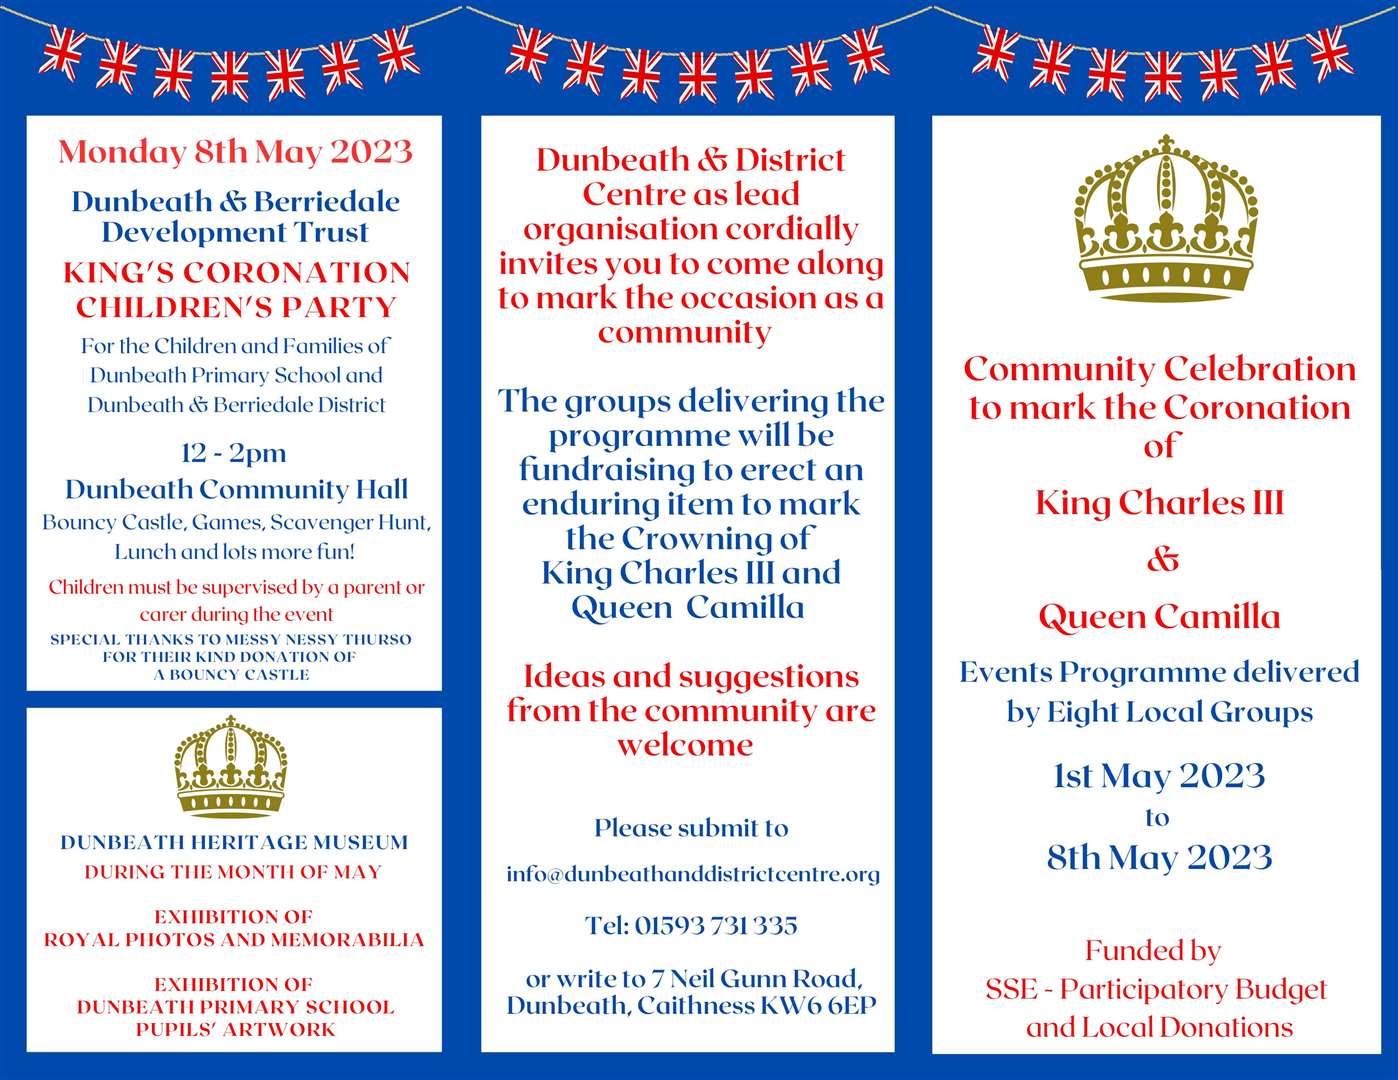 Leaflet for the programme of coronation events in Dunbeath and Berriedale (page 1).